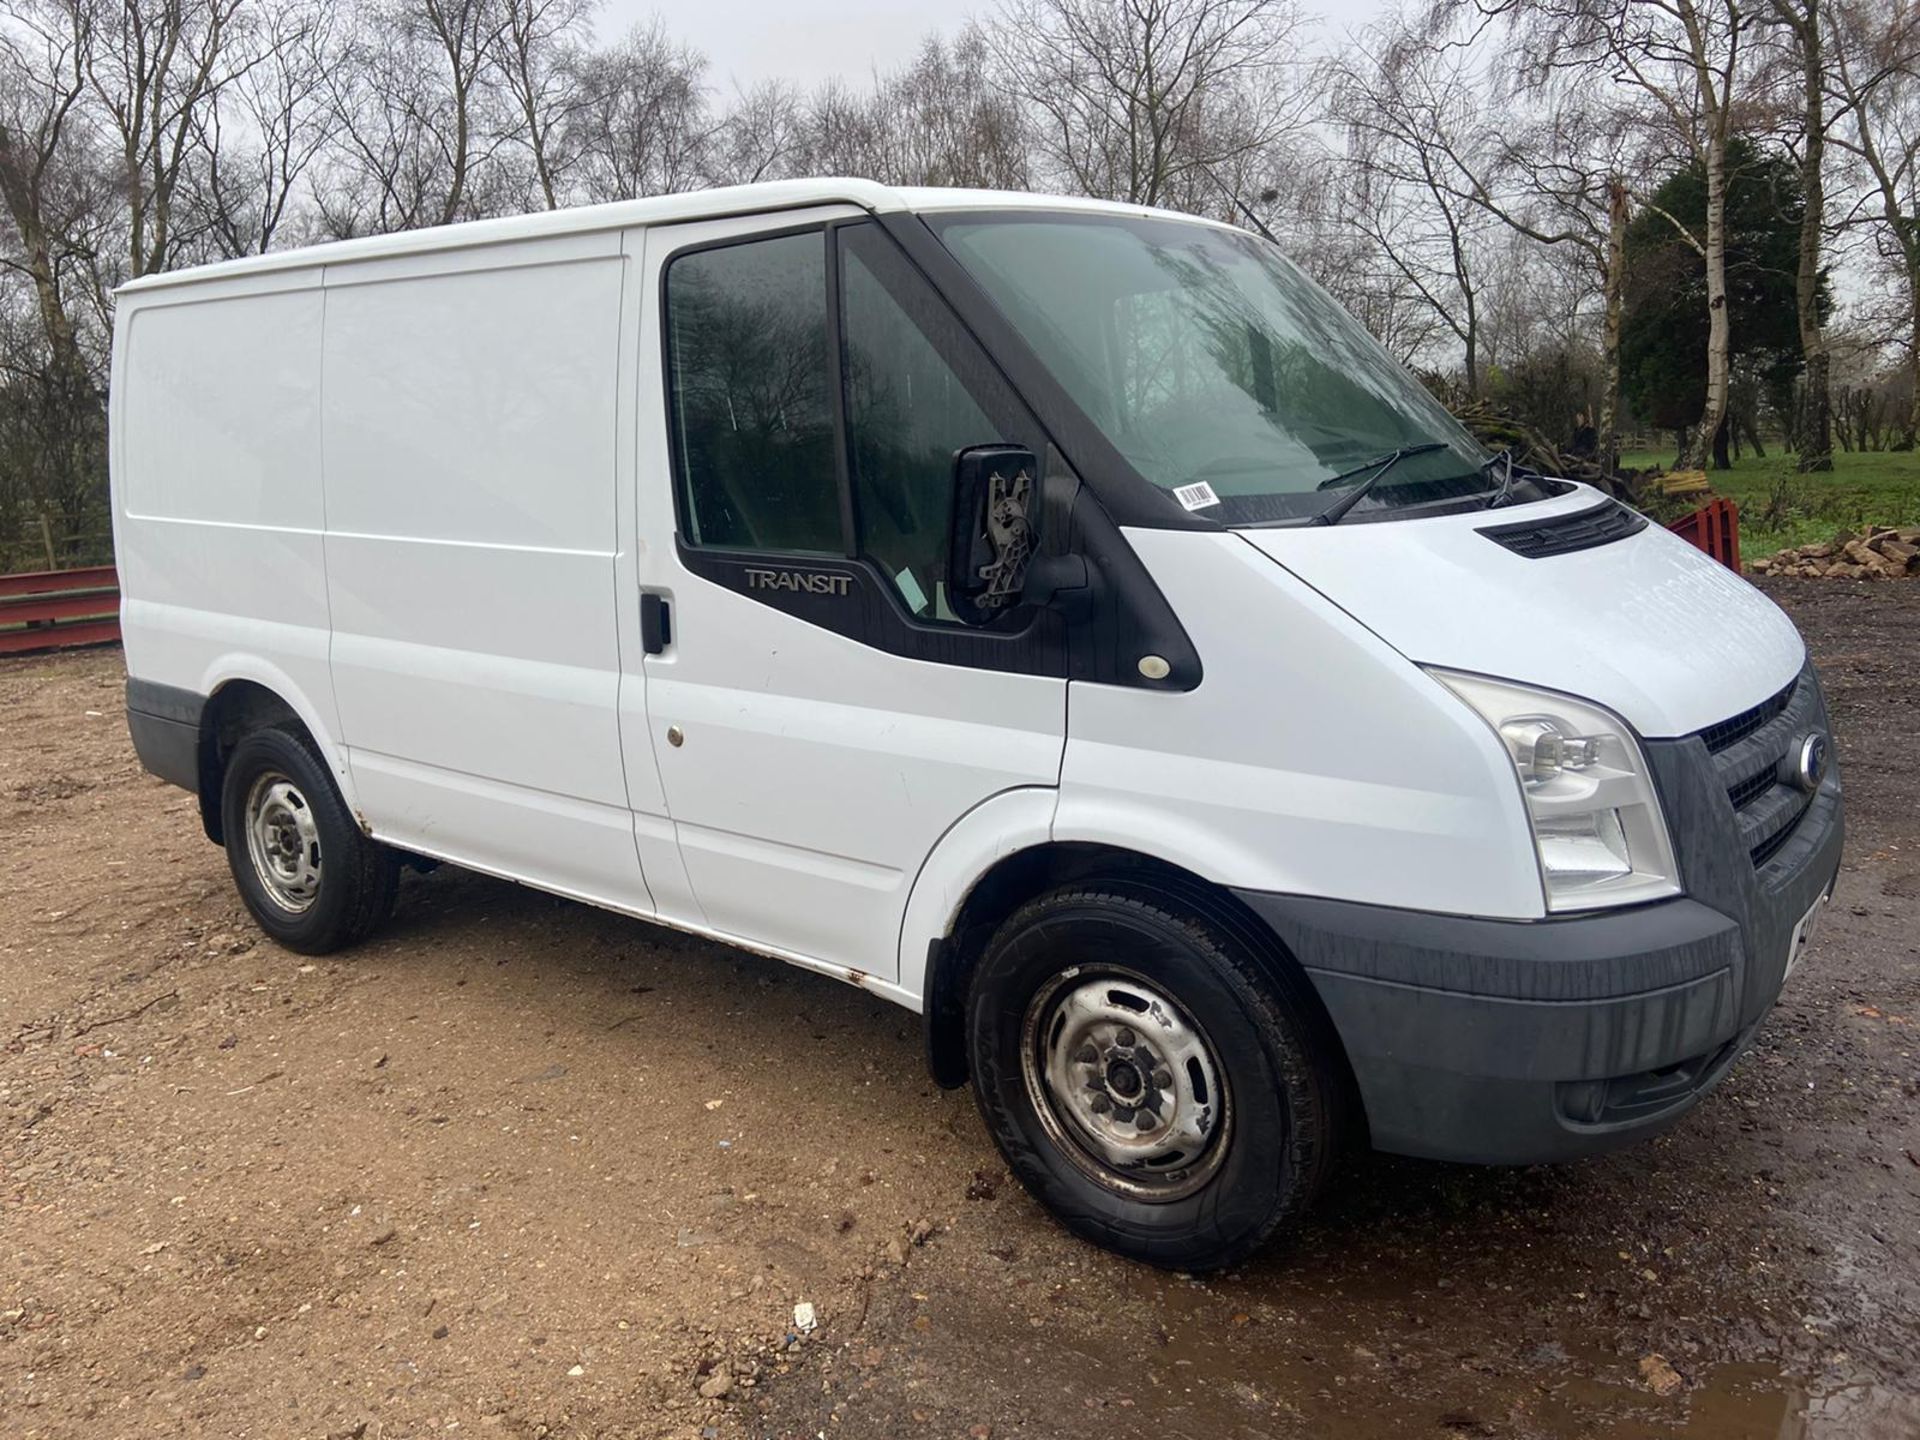 2011/11 REG FORD TRANSIT 115 T280S ECON FW 2.2 DIESEL WHITE PANEL VAN, SHOWING 0 FORMER KEEPERS